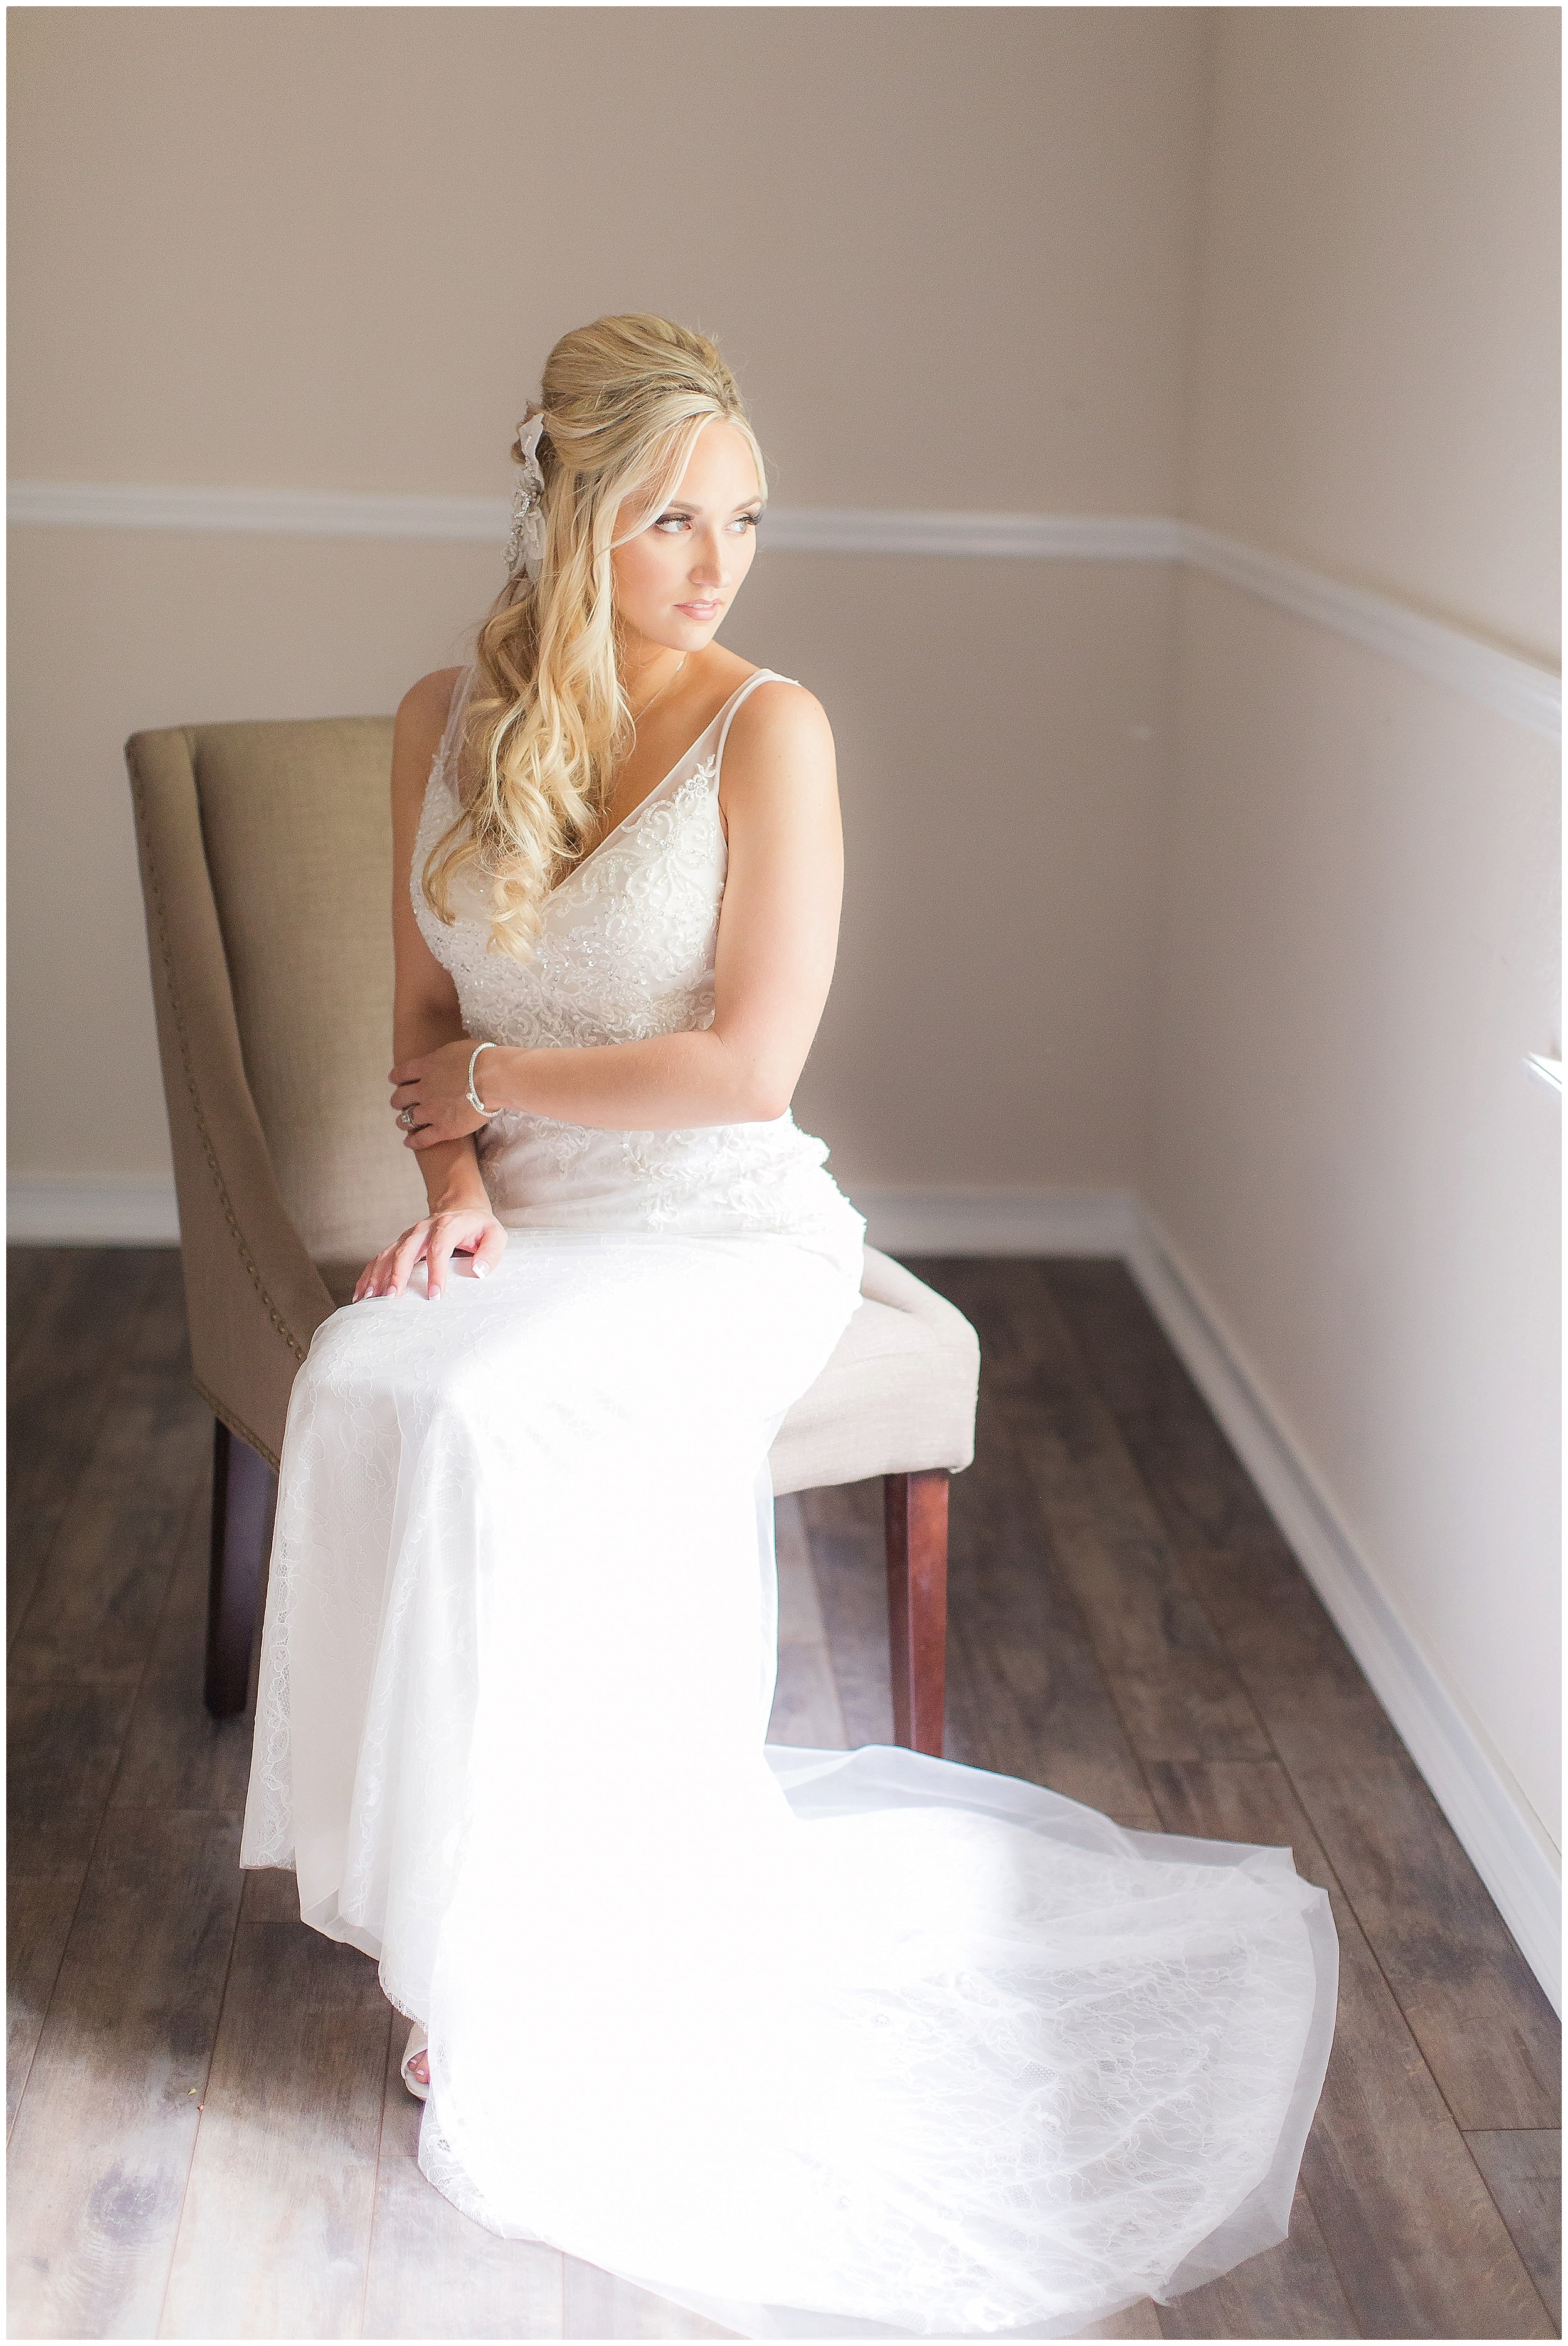 Rustic Lace Dress at Bridle Oaks in Deland, Fl 